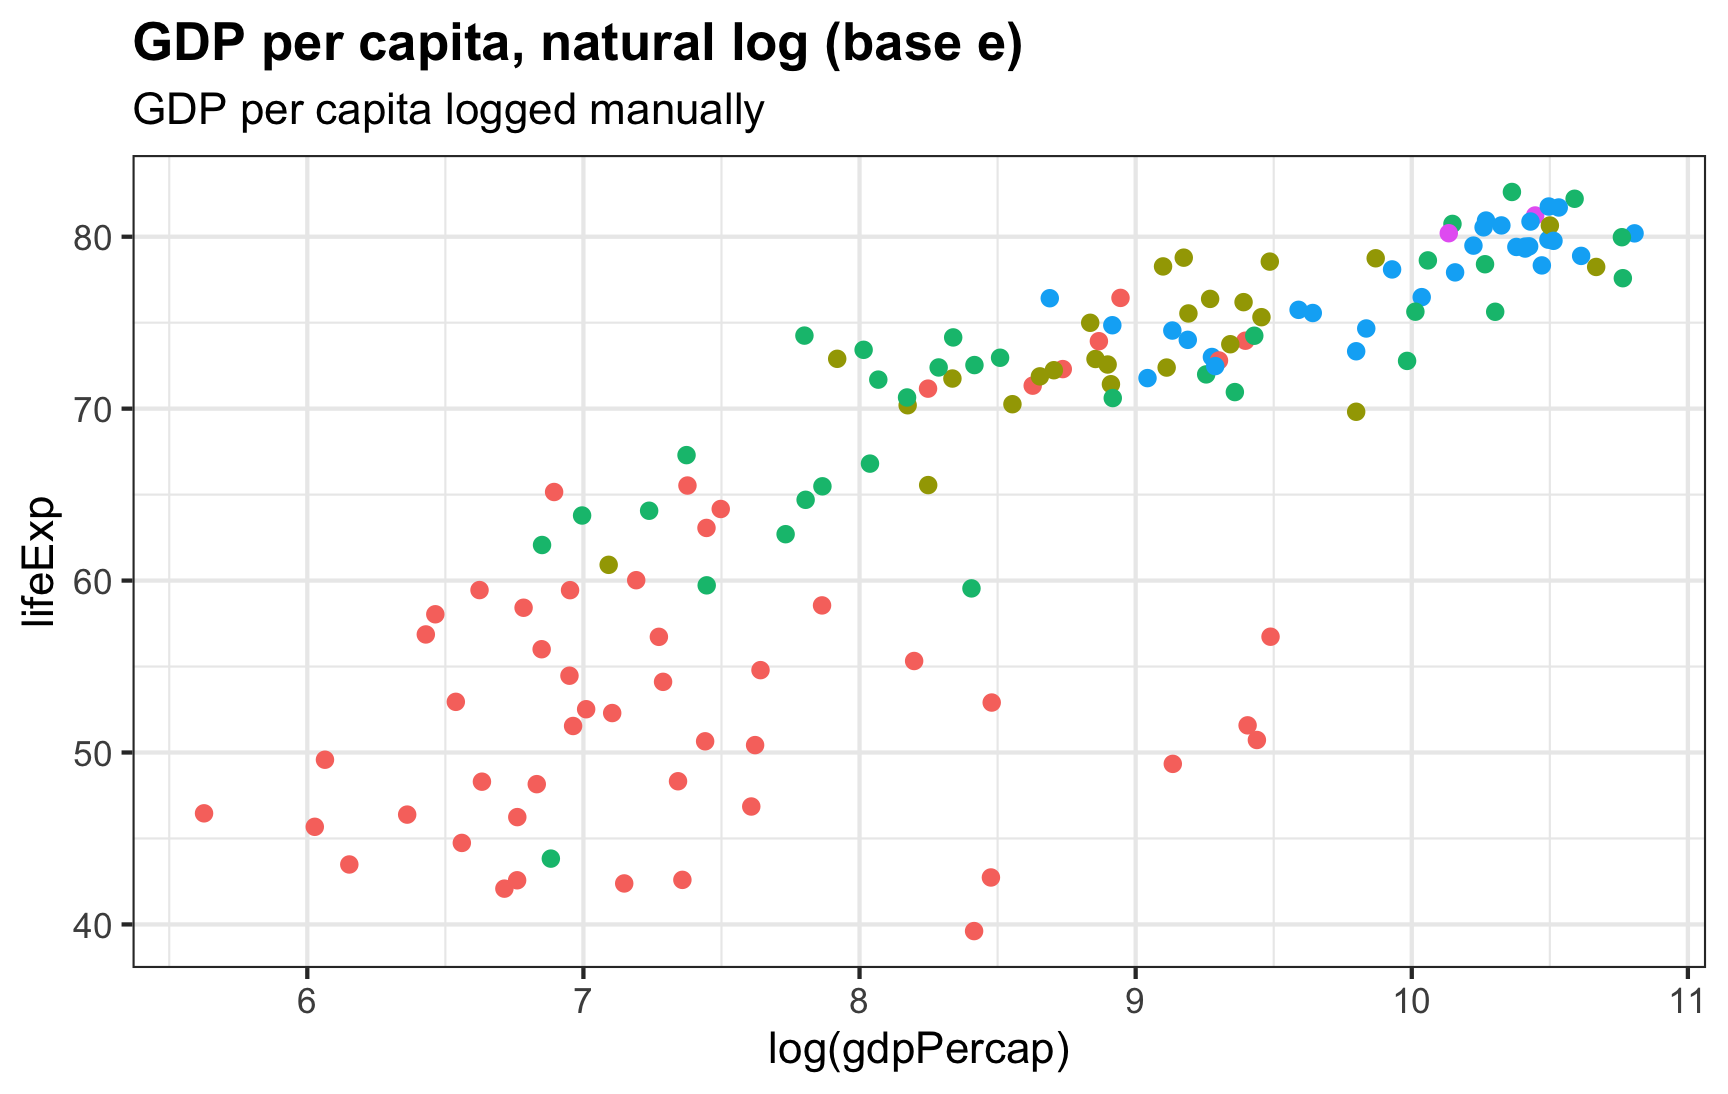 The x-axis now shows GDP per capita scaled to log base $e$, or the natural log, with axis breaks at 6, 7, 8, 9, 10, and 11. The relationship still linear, just like log base 10, but the values are less interpretable. The values on the x-axis were logged before being fed to ggplot.